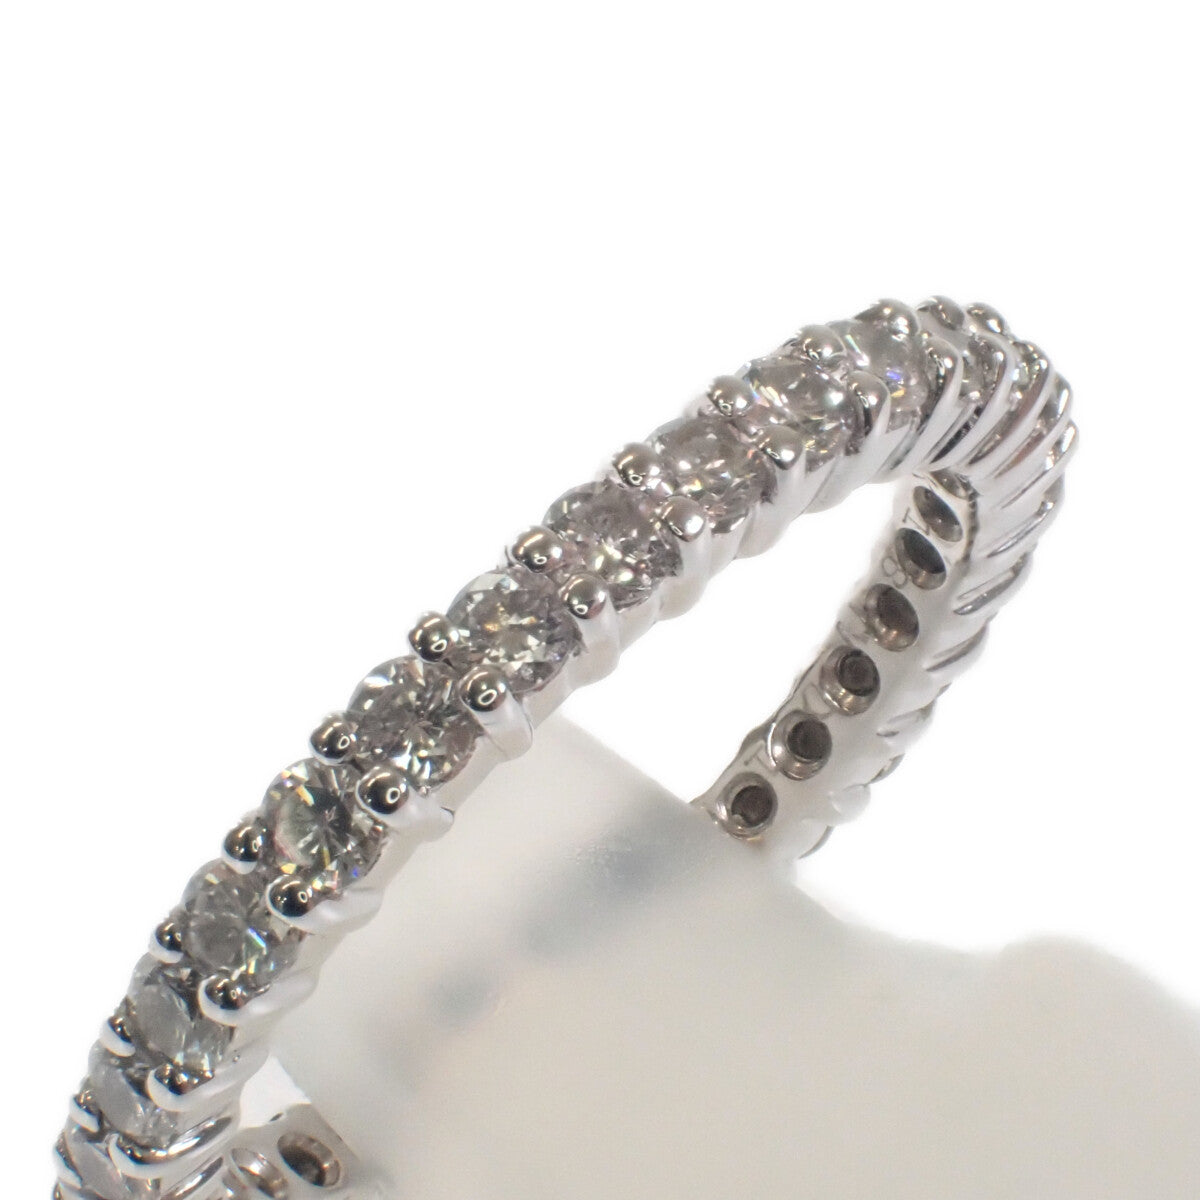 [LuxUness]  K18 White Gold Full Eternity Design Ring with 1.06ct Diamonds, Size 12 - Silver, for Women- Ideal for Special Occasions- (Pre-owned) in Excellent condition